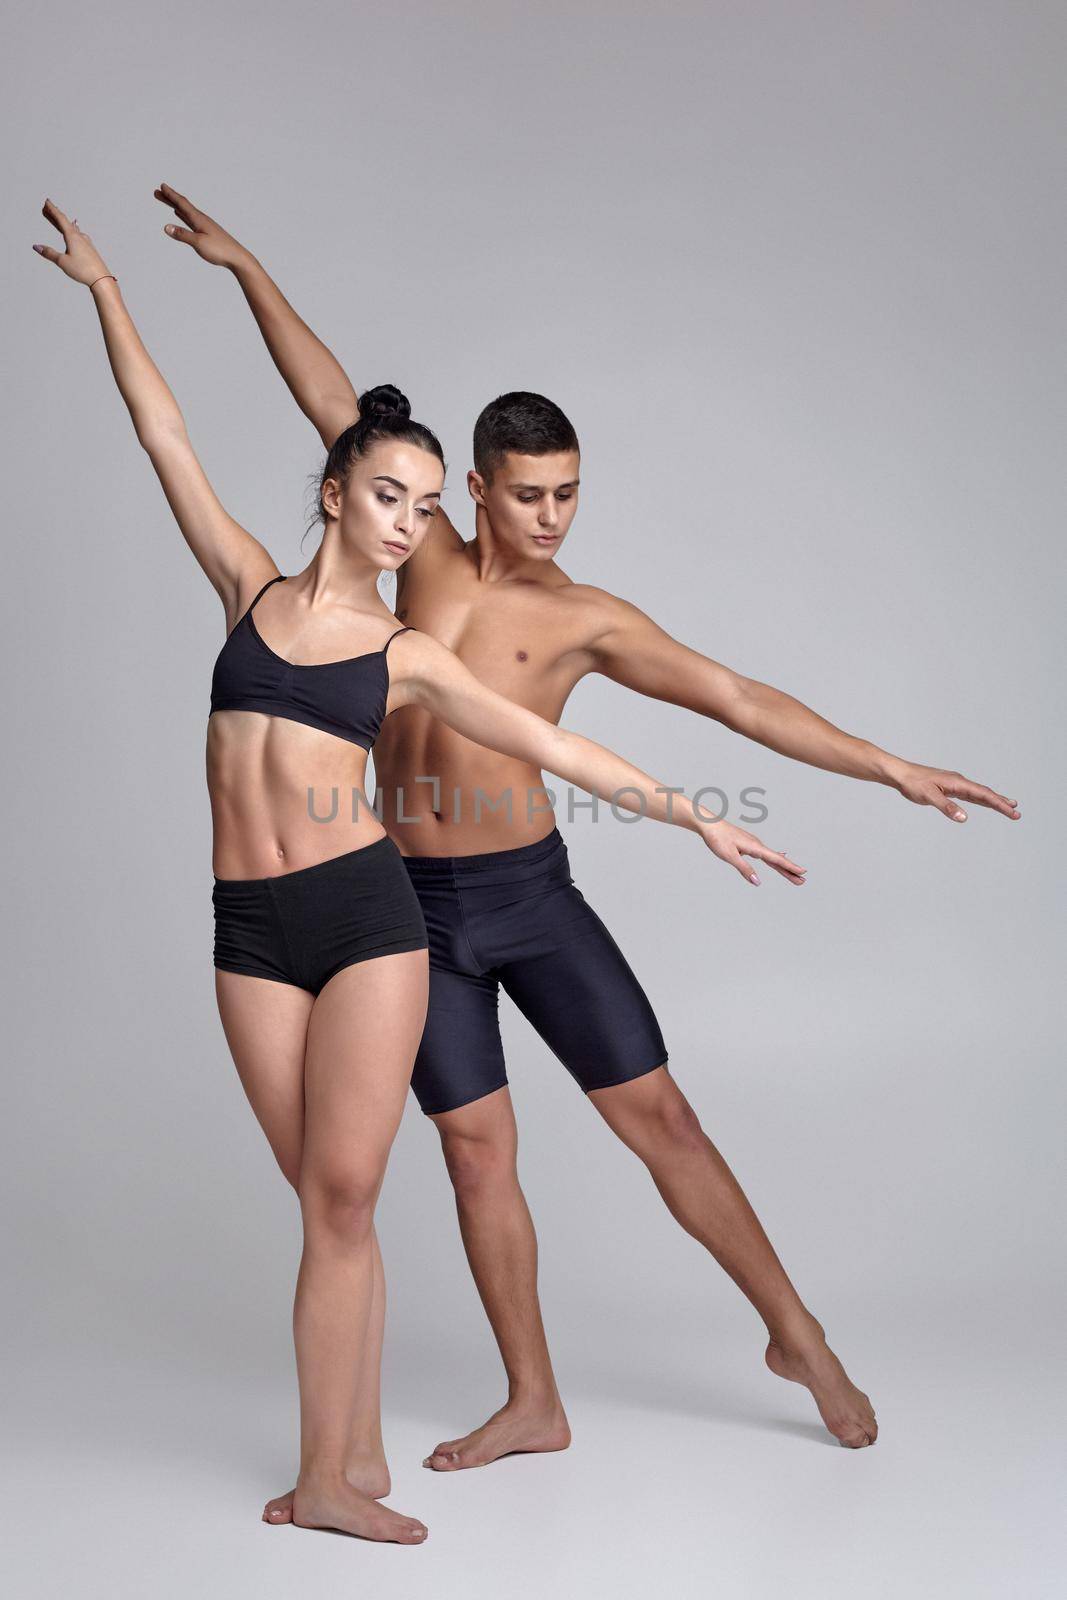 A pair of modern ballet dancers in black suits are posing over a gray studio background. Handsome man in black shorts and beautiful woman in a black swimwear are dancing together. Ballet and contemporary choreography concept. Art photo.